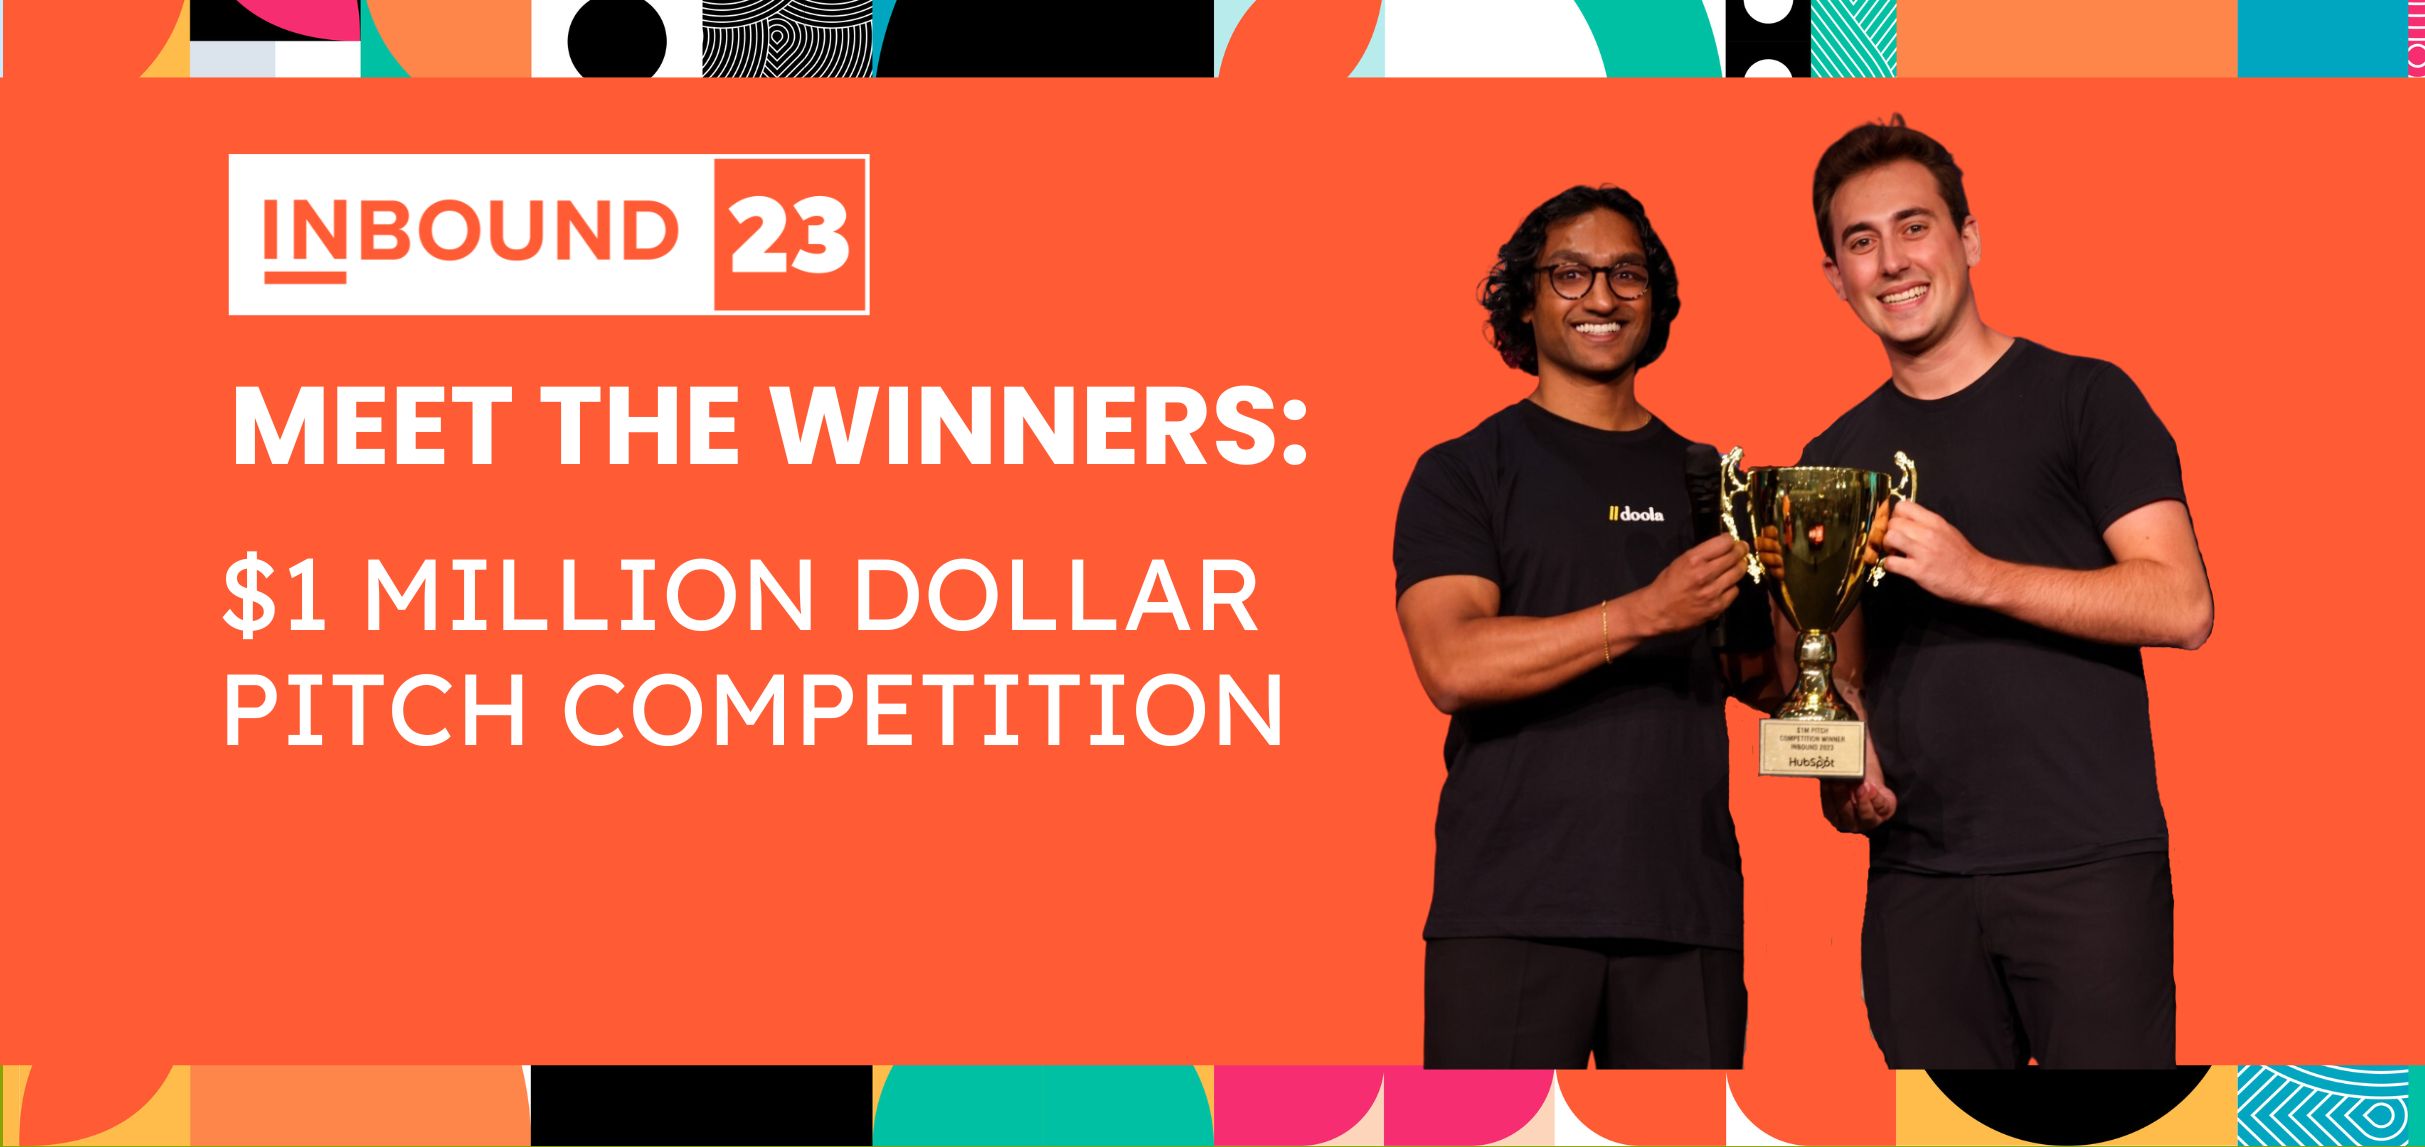 Announcing the Winners of the INBOUND23 Million Dollar Pitch Competition